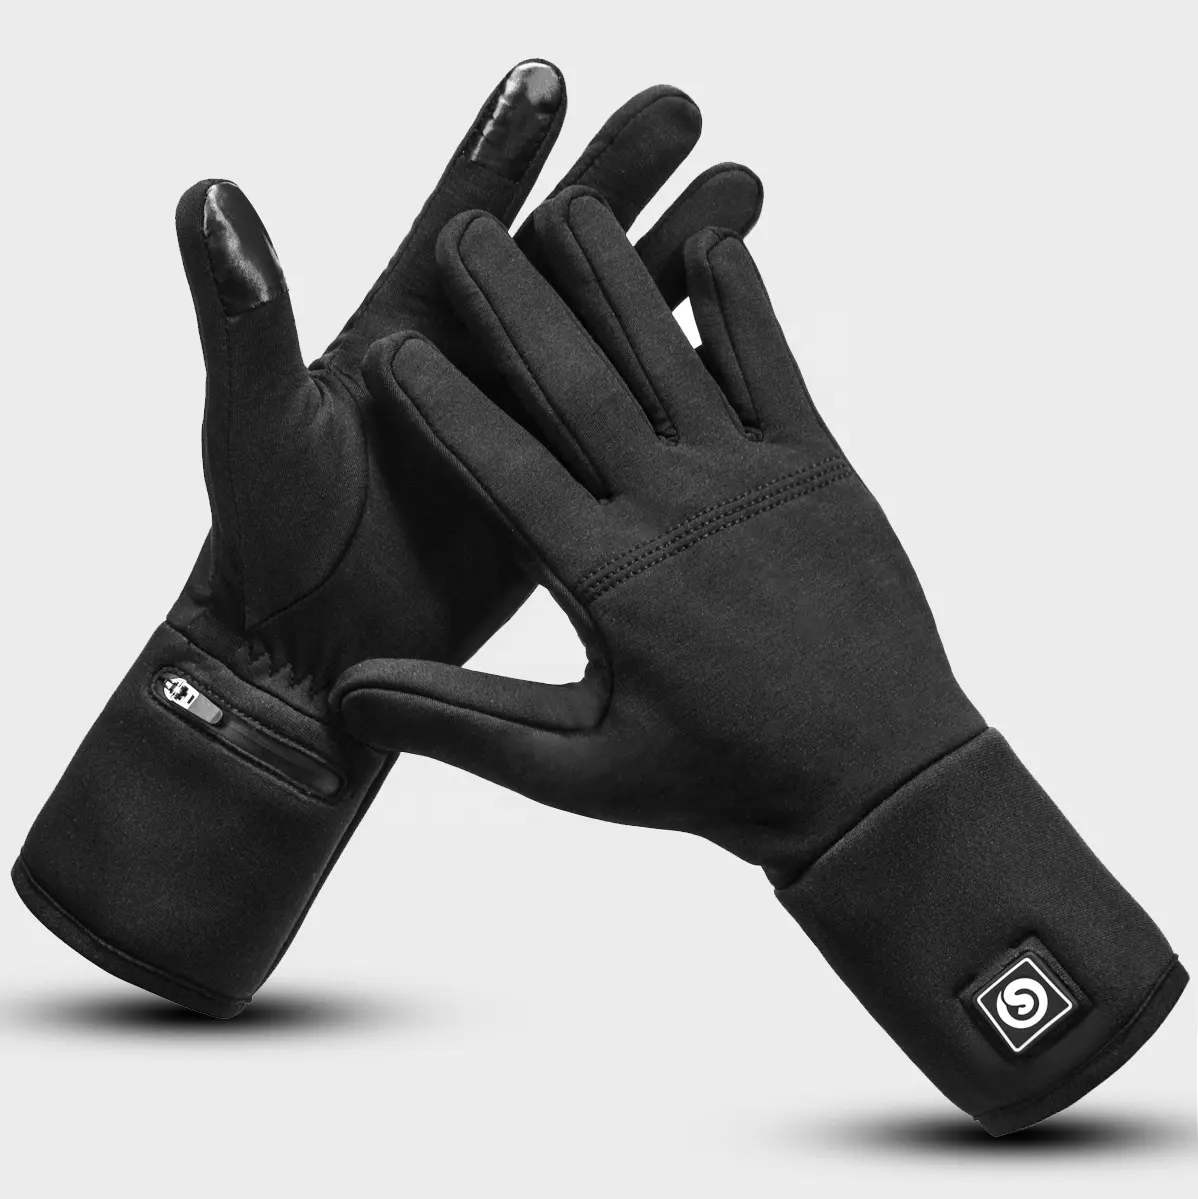 Heated Gloves SAVIOR 7.4V 2200Mah Rechargeable Battery Heated Glove Liner Thin Heated Gloves Bike Gloves